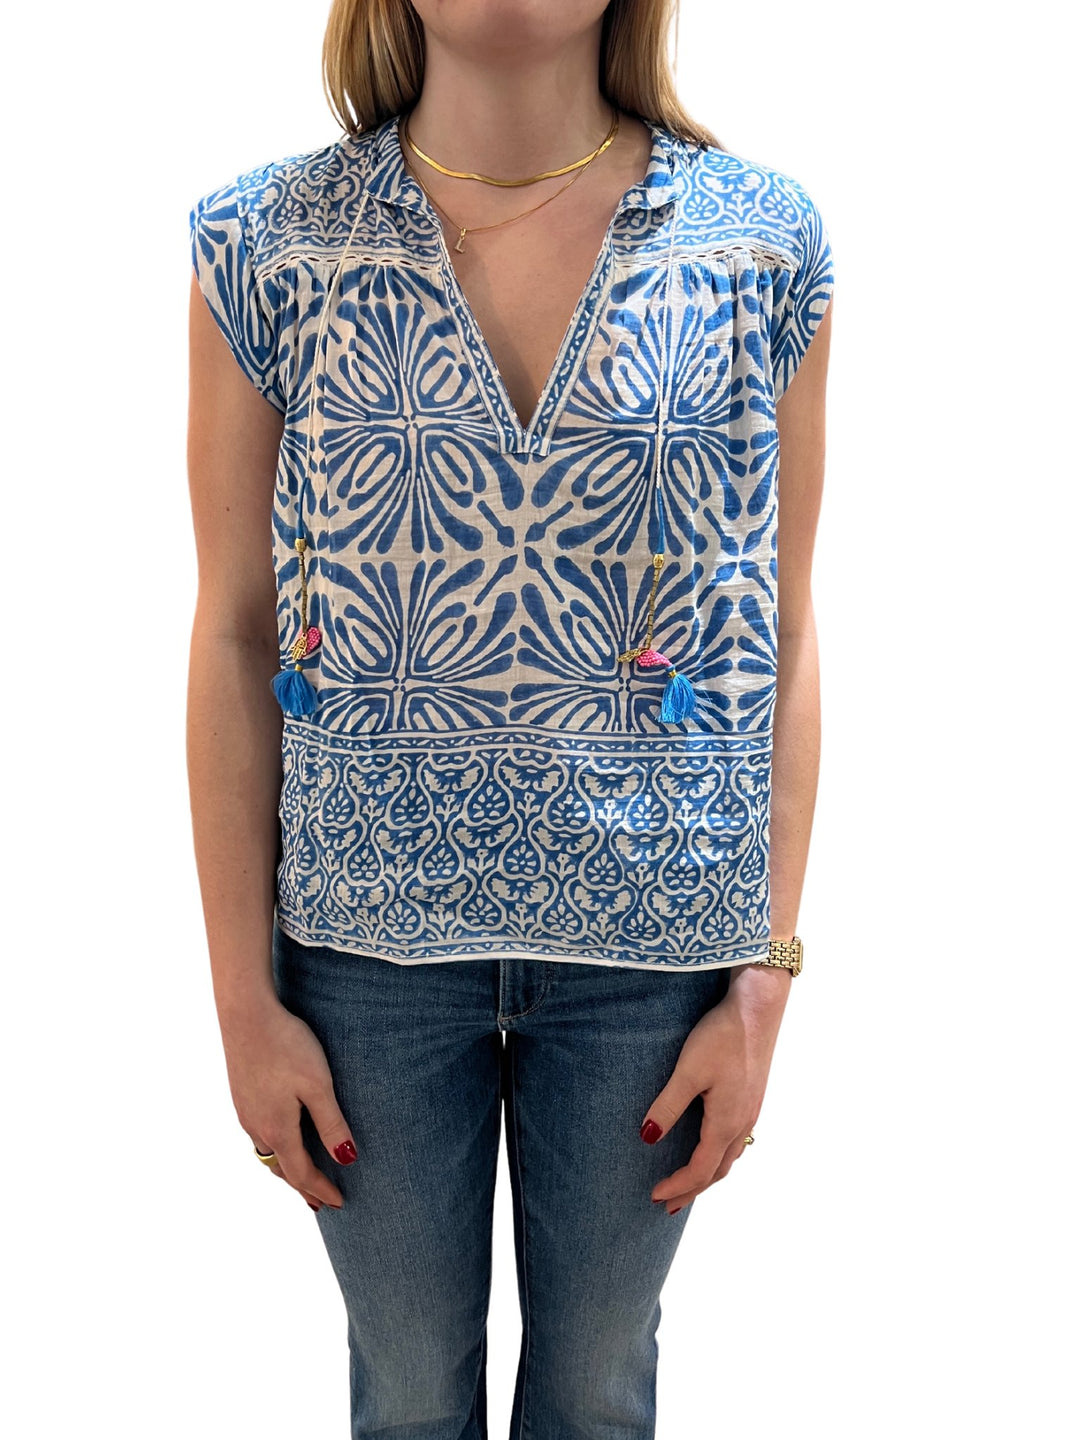 Bell by Alicia Bell Aubry Top - Capri by Sunset & Co.